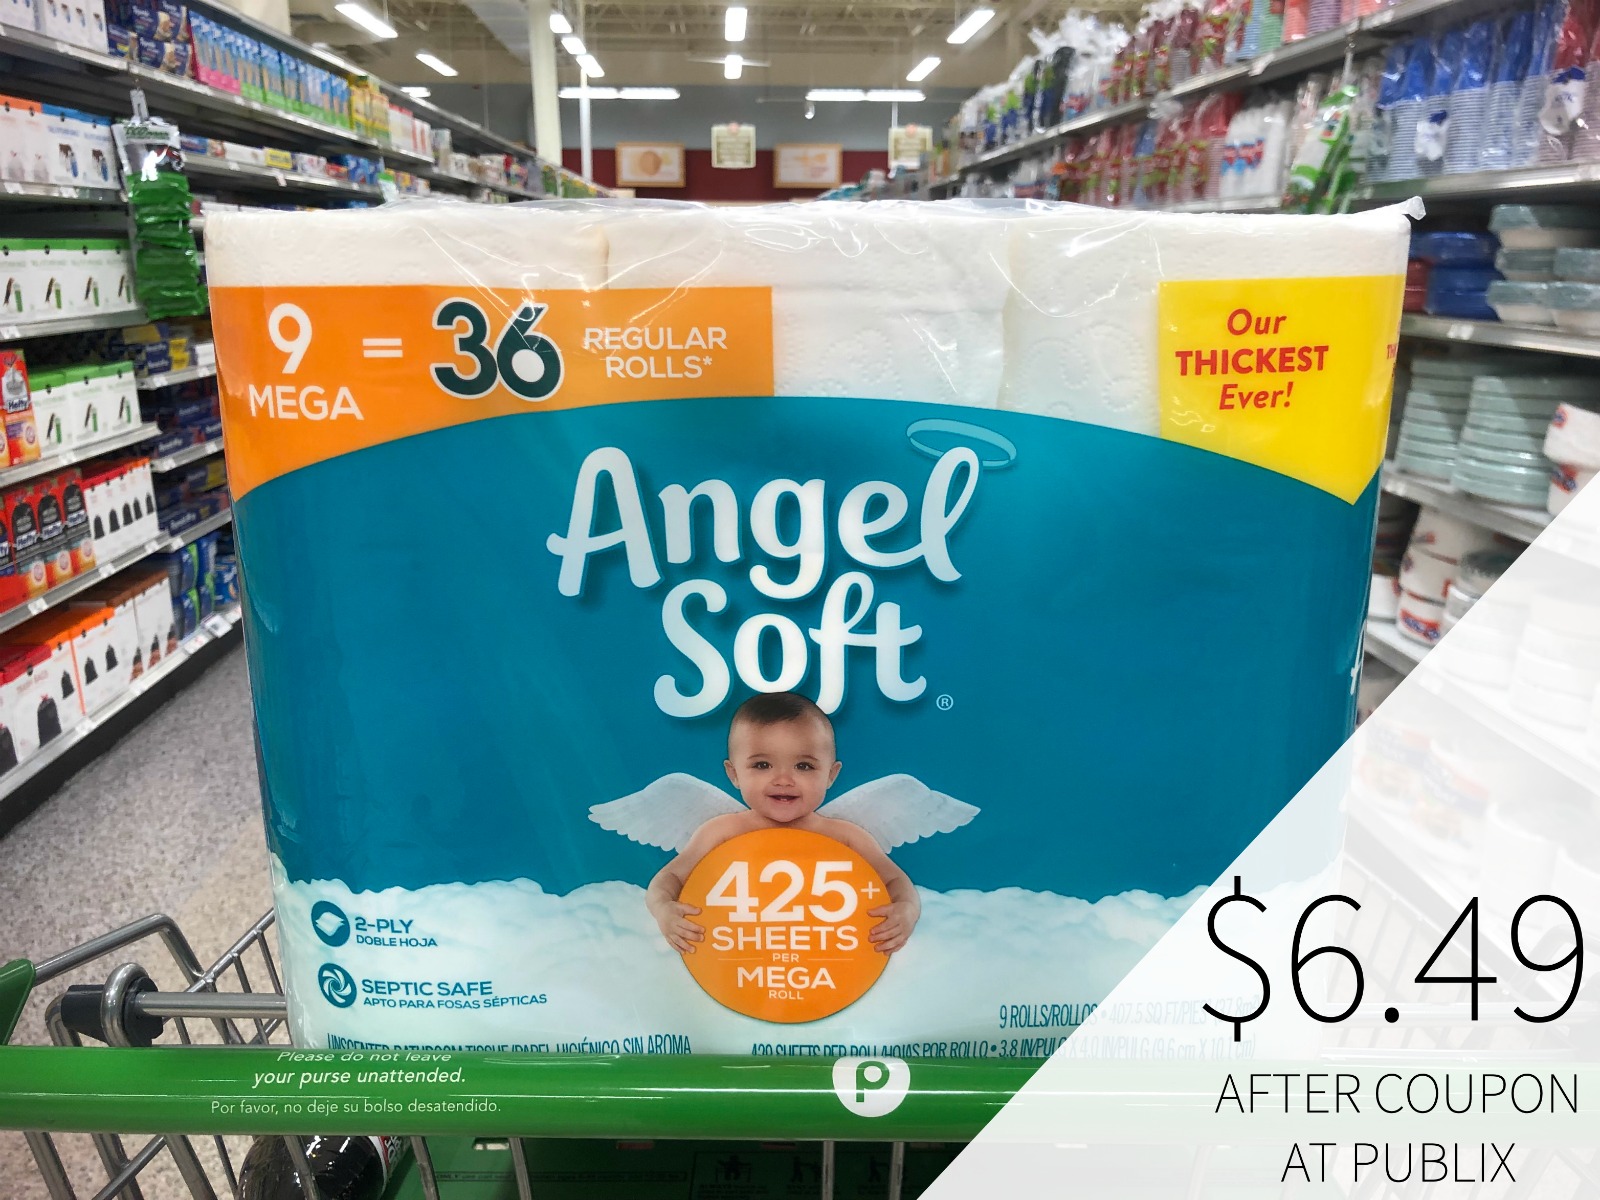 Fantastic Price On Big Packs Of Angel Soft® Bathroom Tissue As Part Of The Current Publix Ad